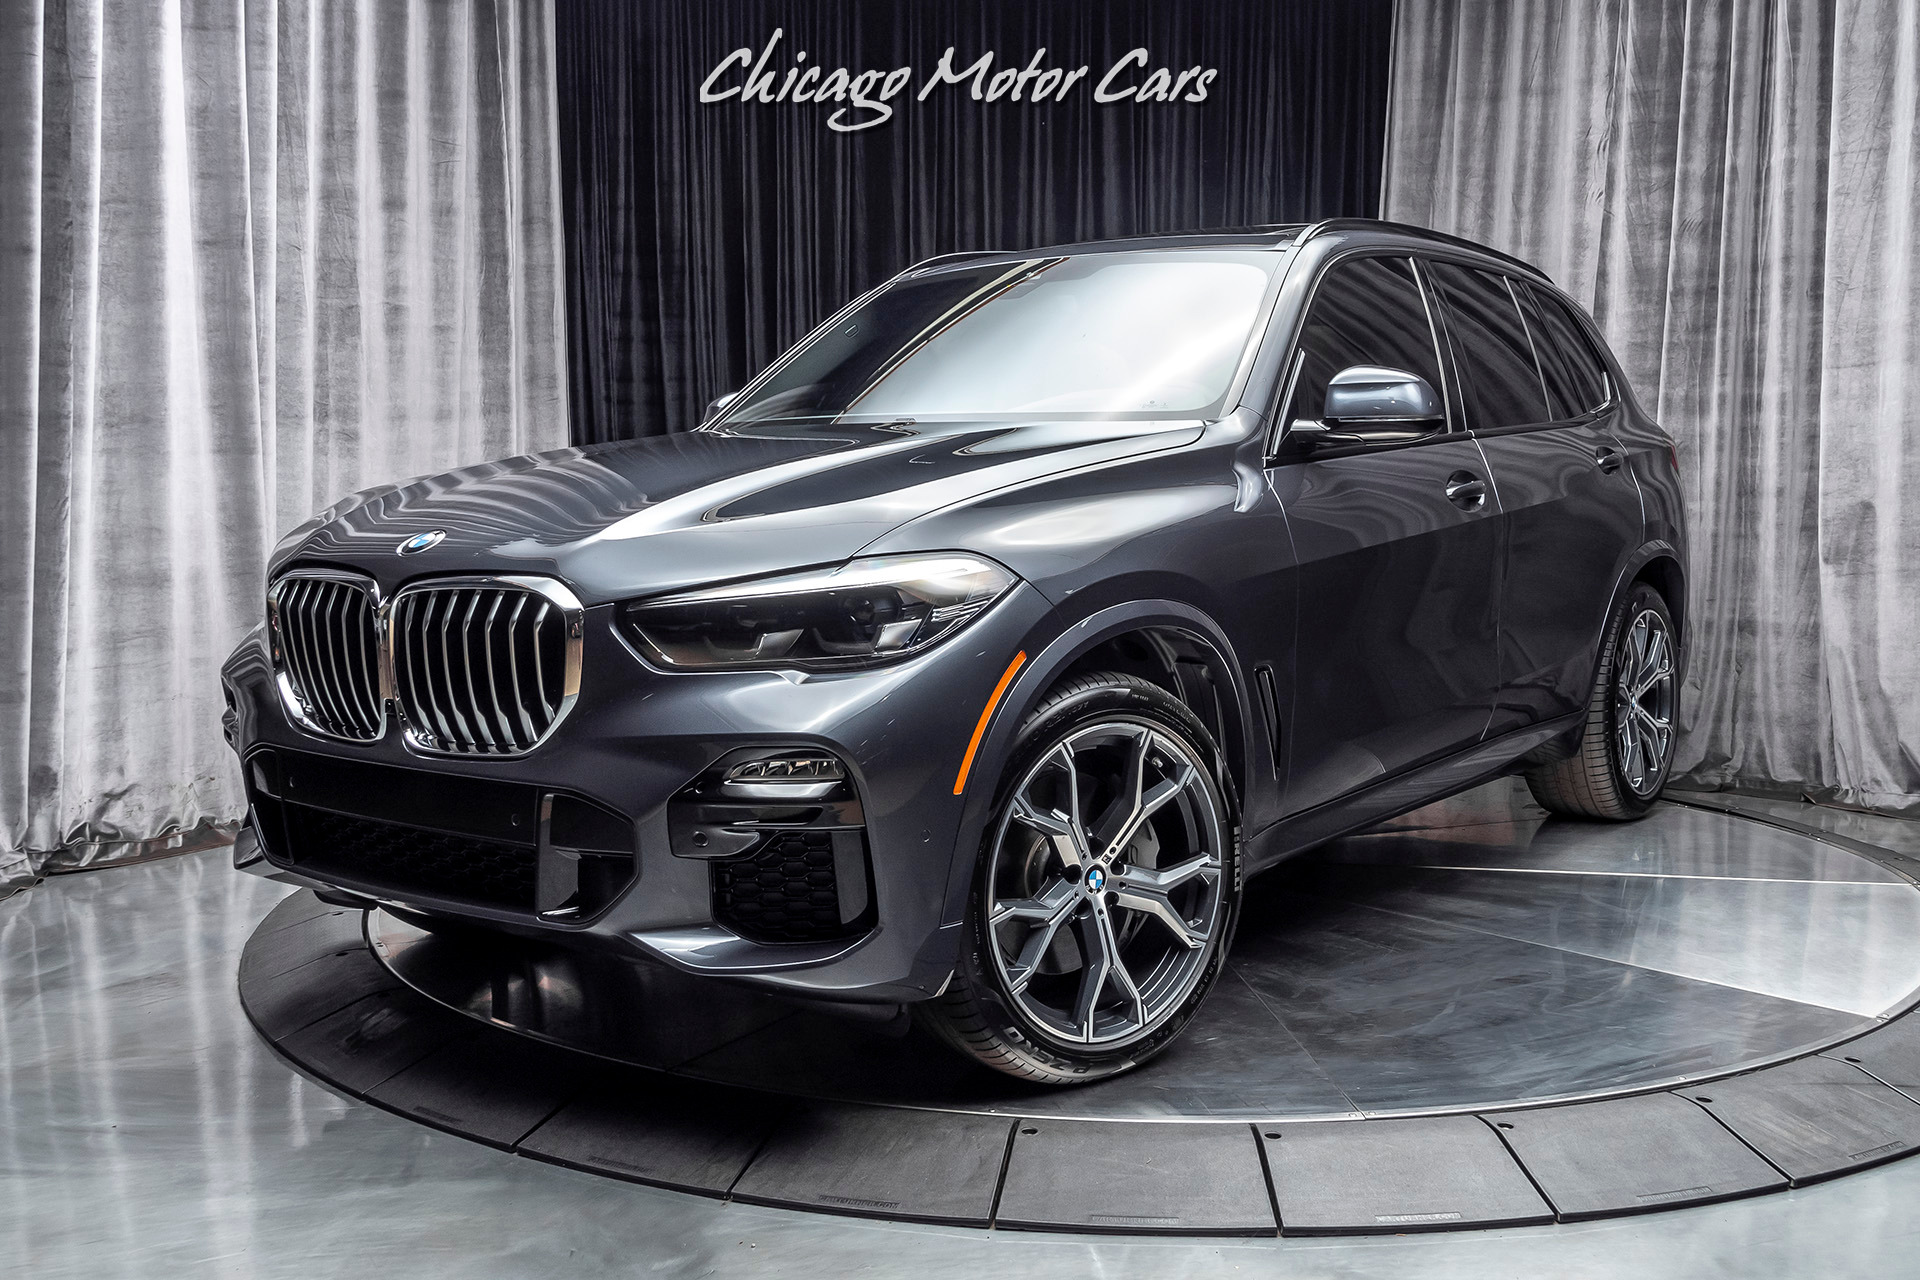 Used-2019-BMW-X5-xDrive50i-Only-2500-Miles-Original-MSRP-85345-LOADED